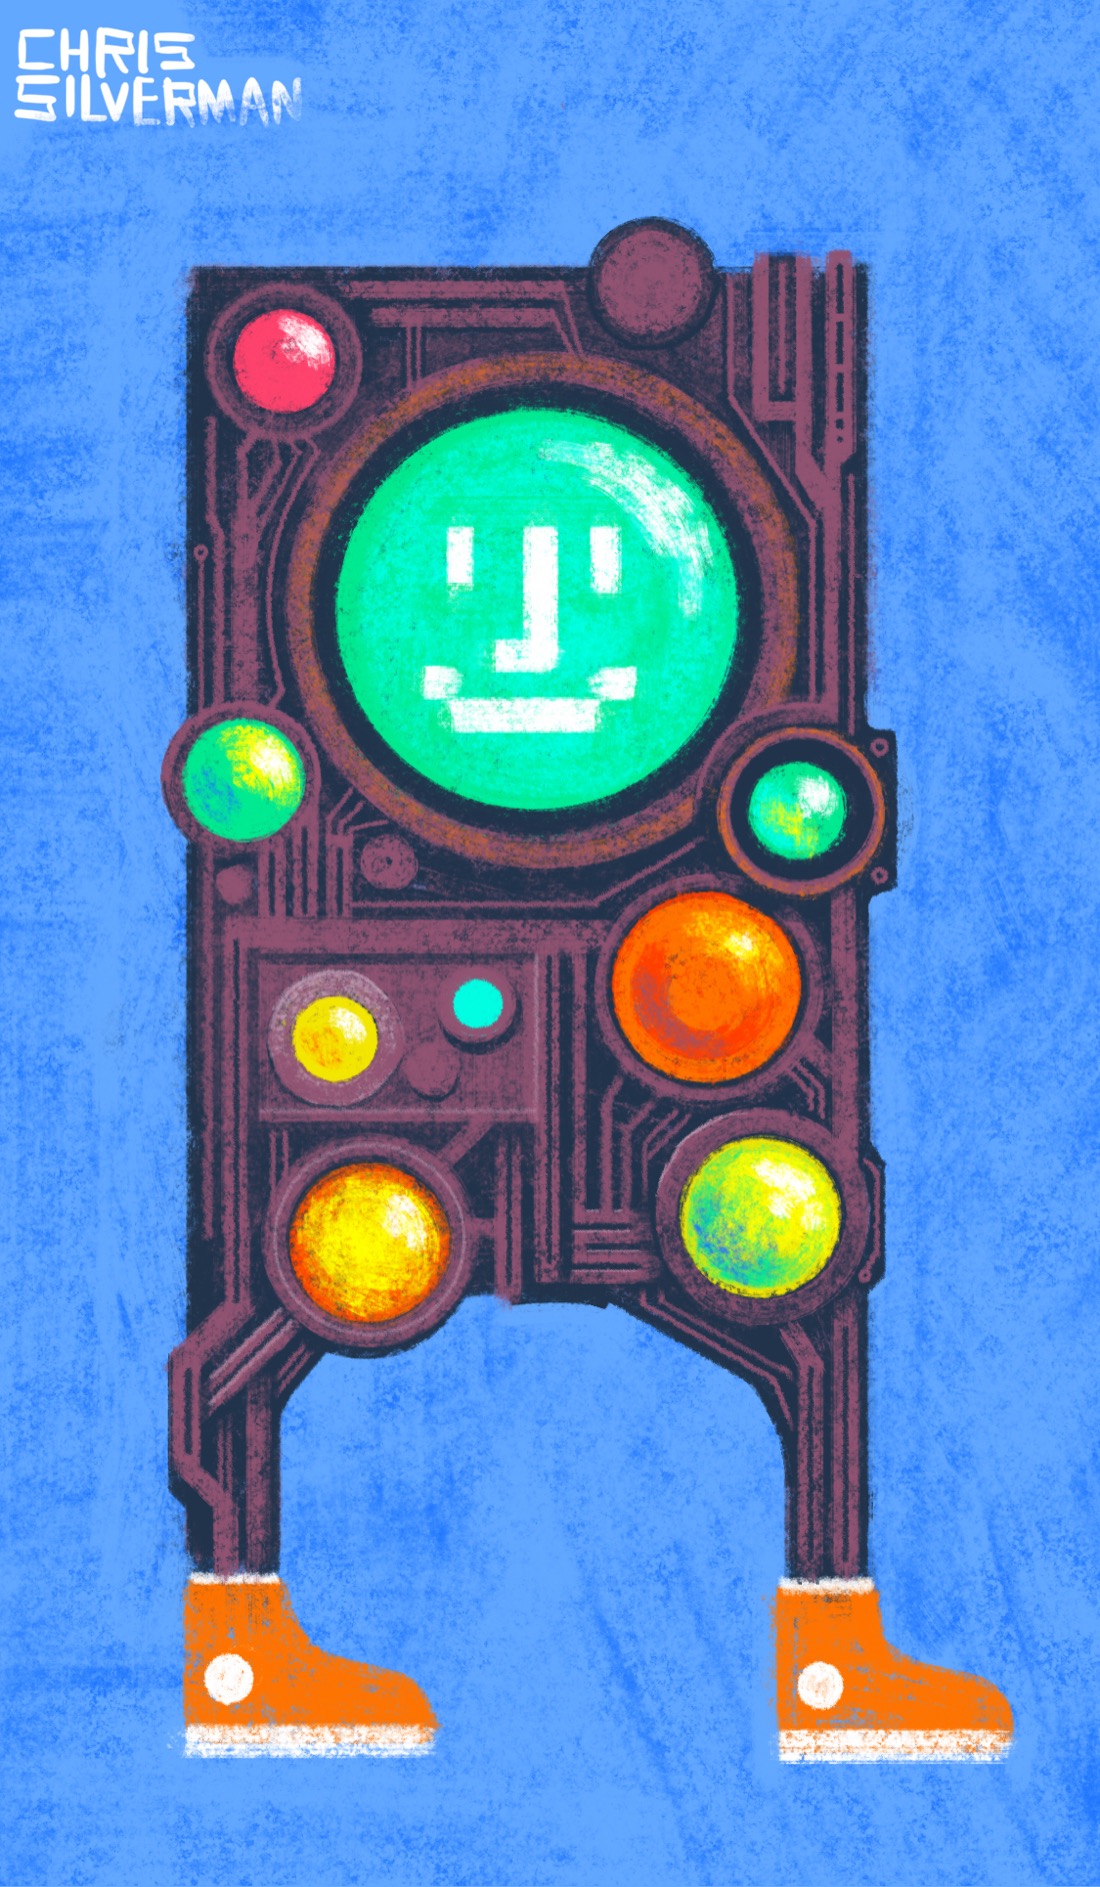 A rectangular machine with two legs and no arms. The machine has a complex, intricate exterior of interconnecting pipes and wires, interspersed with round, colorful, glassy panels that look like lights, buttons, or perhaps screens. Centered at the top of the machine, where a face would be, is the largest of the round panels. It is glowing green, with a smiling face on it rendered in blocky, white pixels, reminiscent of the Happy Mac icon. The round panels are red, yellow, and green. The body of the machine is a rust brown. The machine is wearing bright orange high-top sneakers. It is set against a blue background.